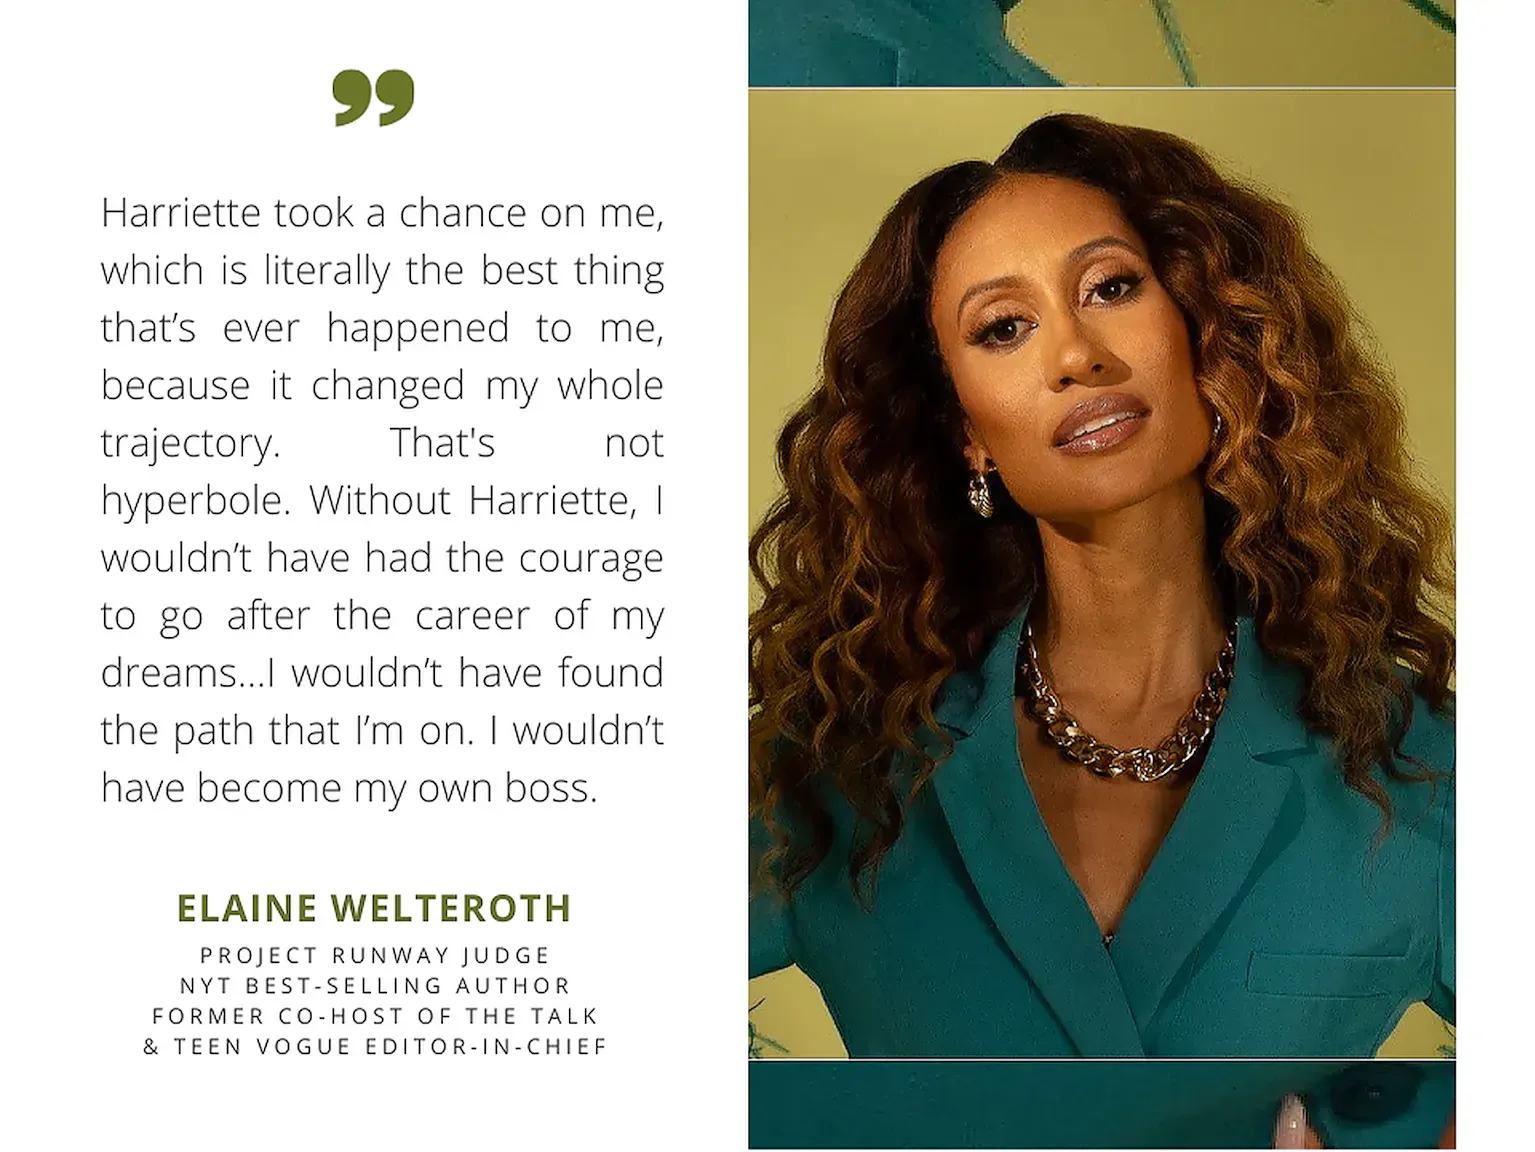 Elaine Welteroth — Project Runway Judge, NYT Best-Selling Author, Former Co-Host of The Talk & Teen Vogue Editor-in-Chief